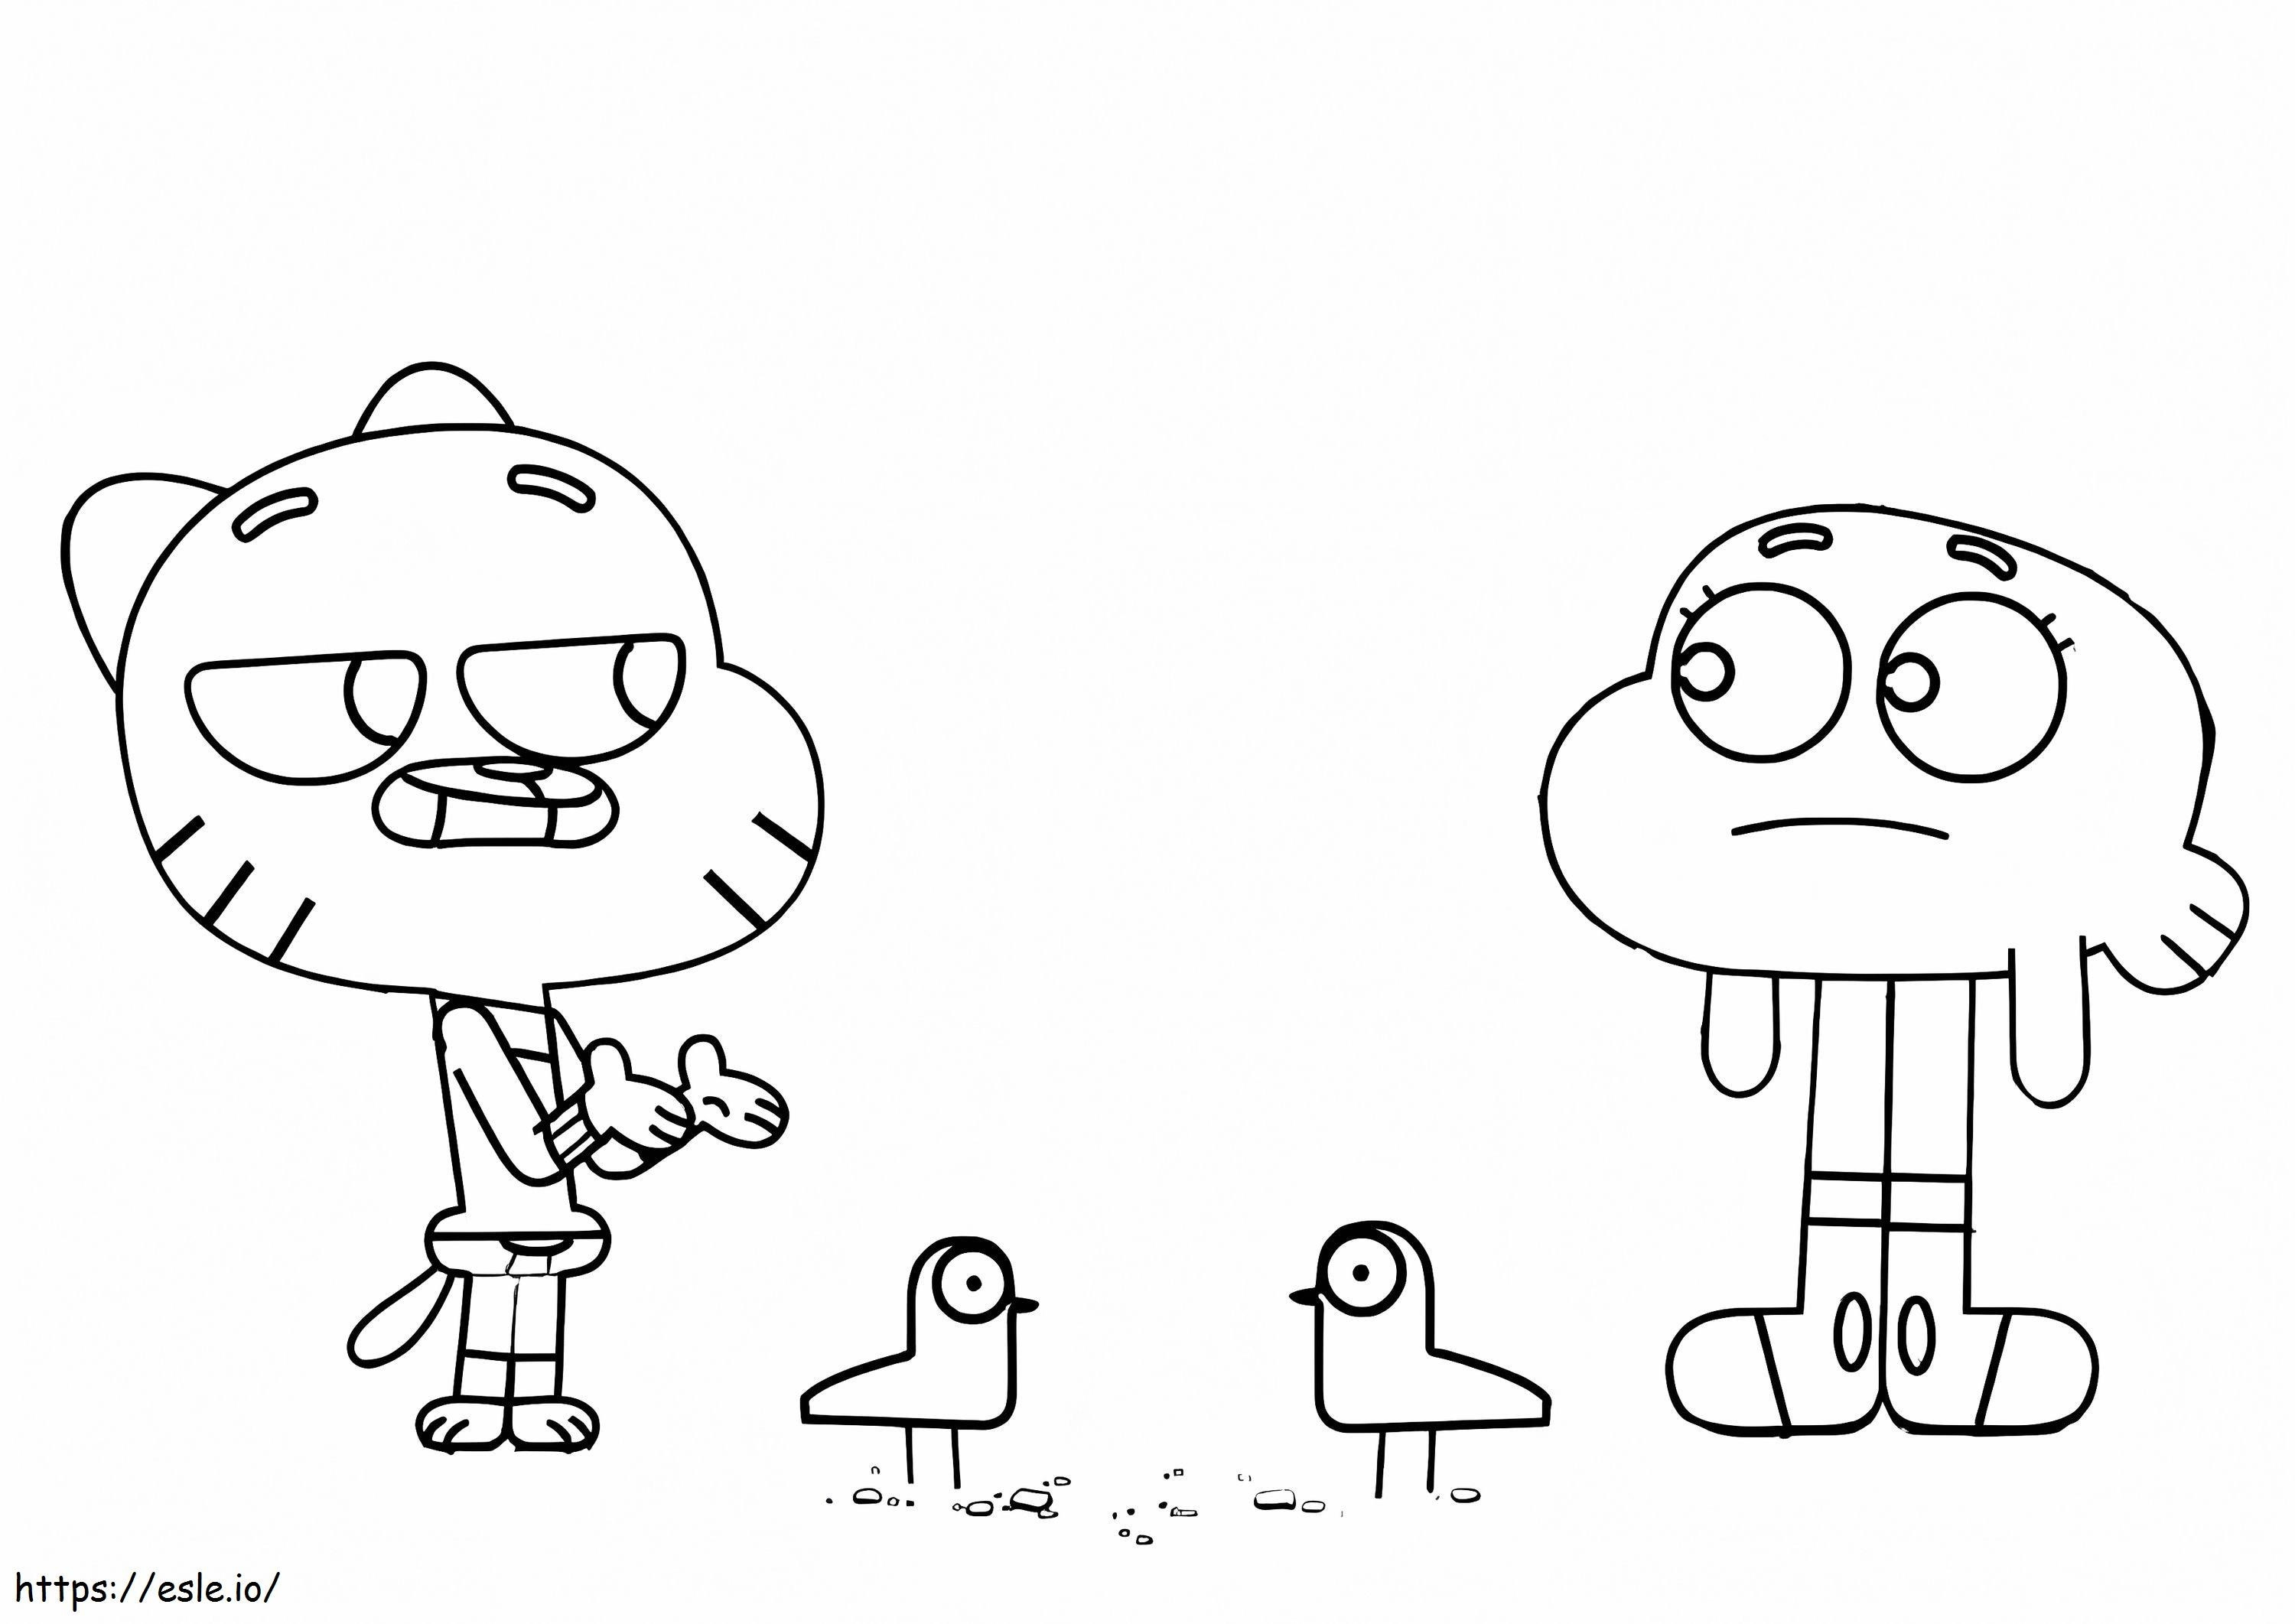 Darwin Gumball And Two Birds coloring page